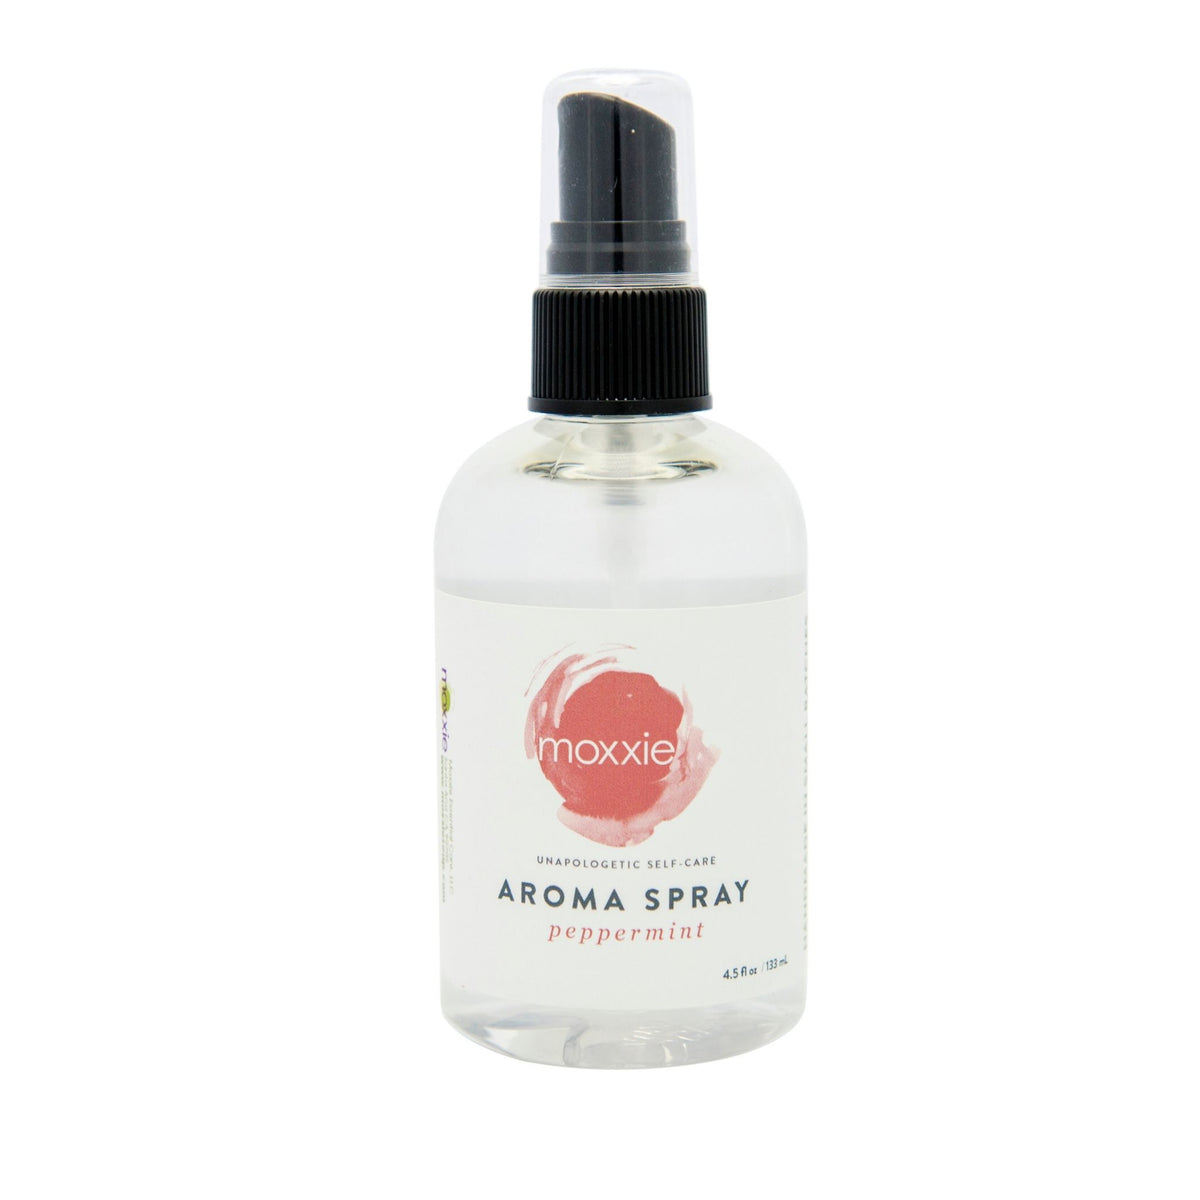 Moxxie Aroma Spray in peppermint.  Handcrafted with pure essential oils to use on your body or in a room